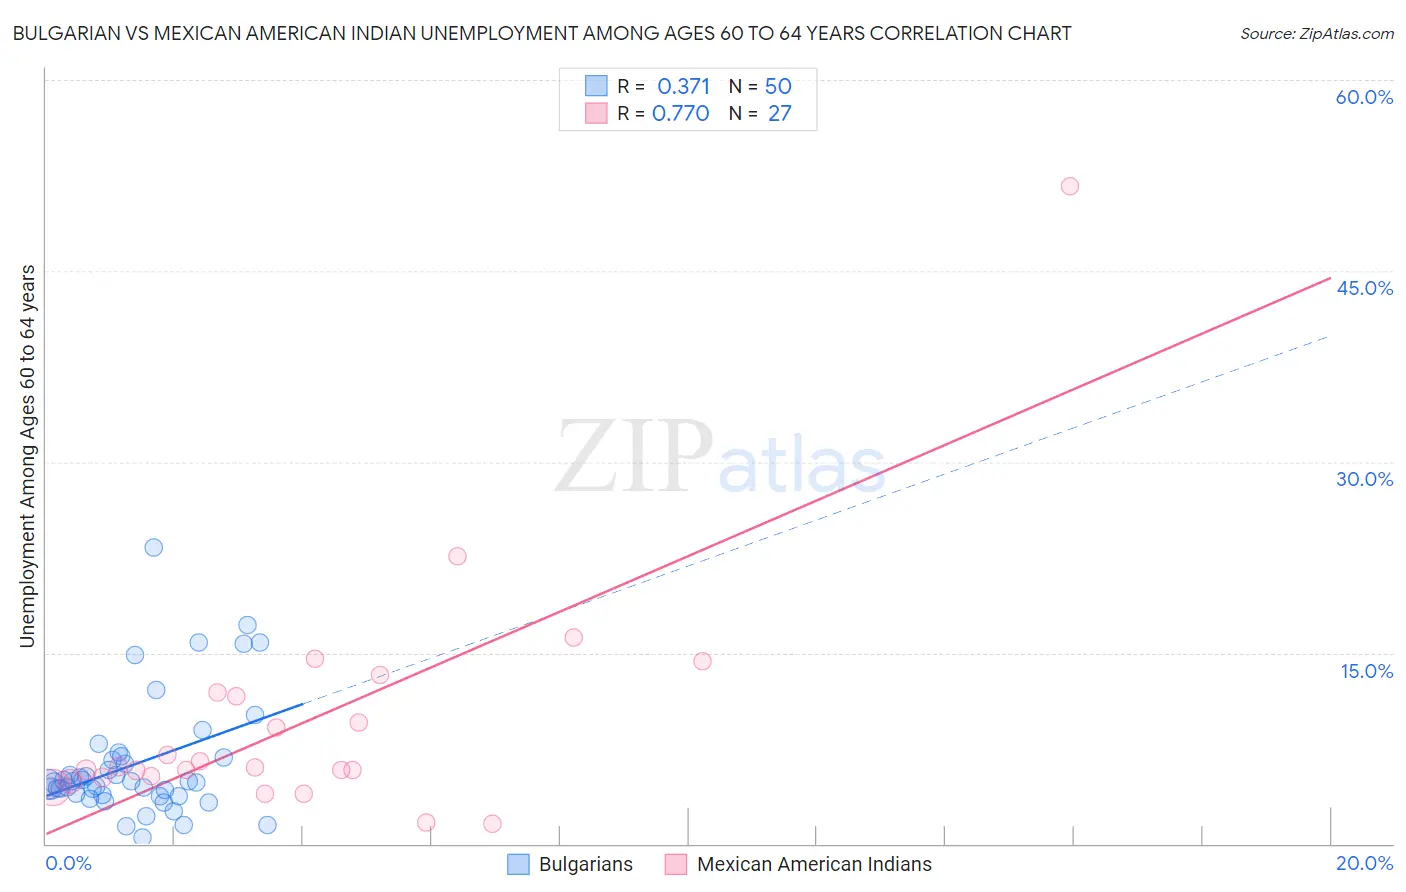 Bulgarian vs Mexican American Indian Unemployment Among Ages 60 to 64 years